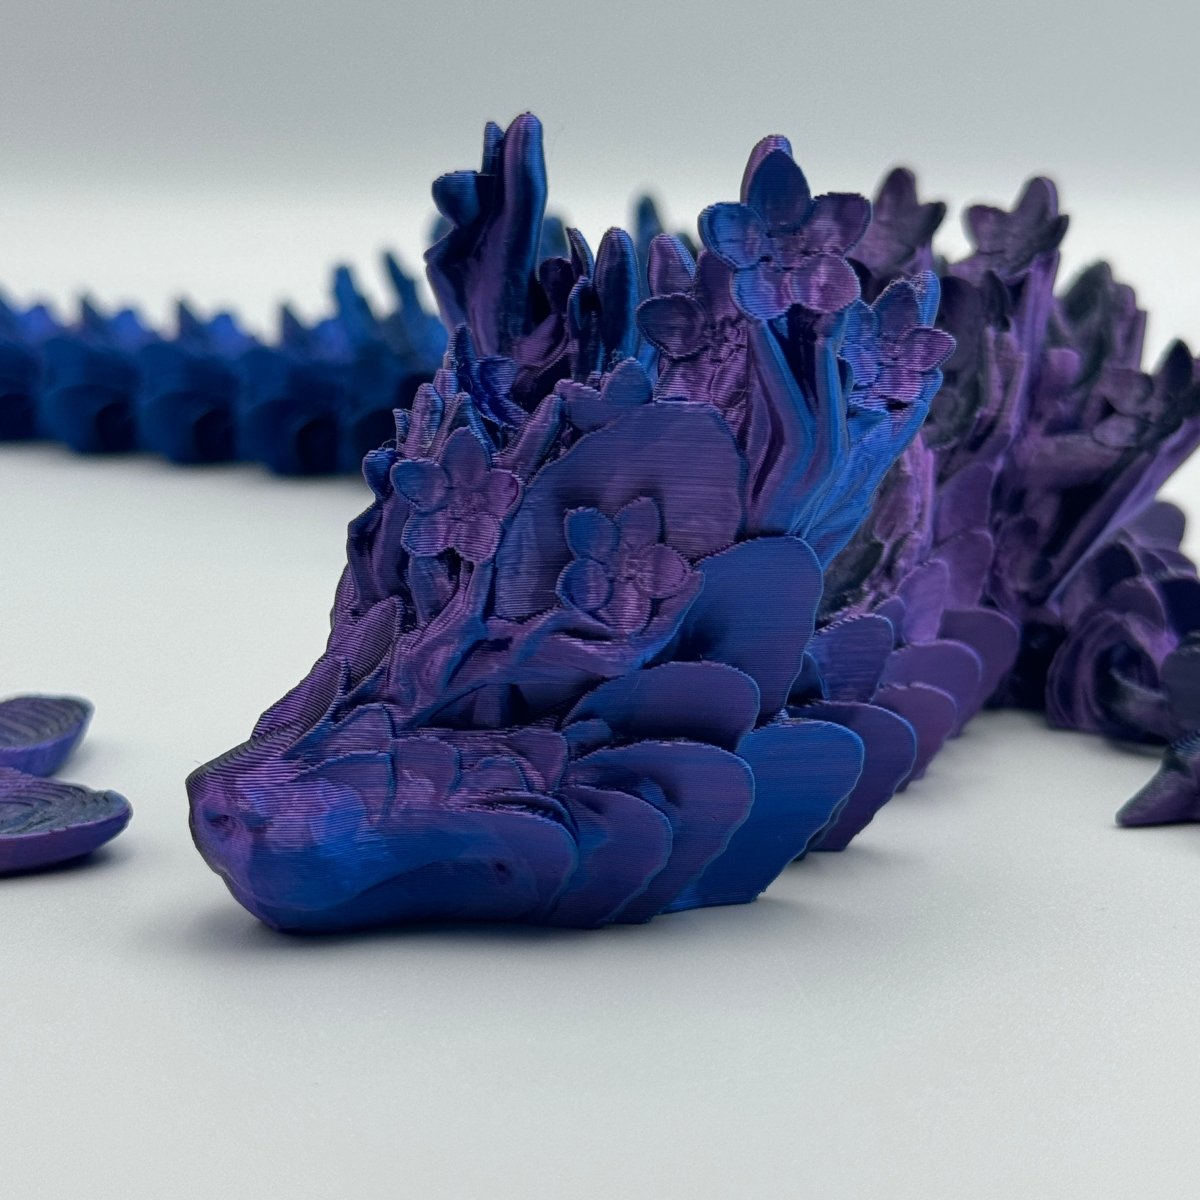 Cherry Blossom Dragon: Exquisite 22" 3D Printed Flexible Cherry Blossom Dragon - Cosmic Chameleon